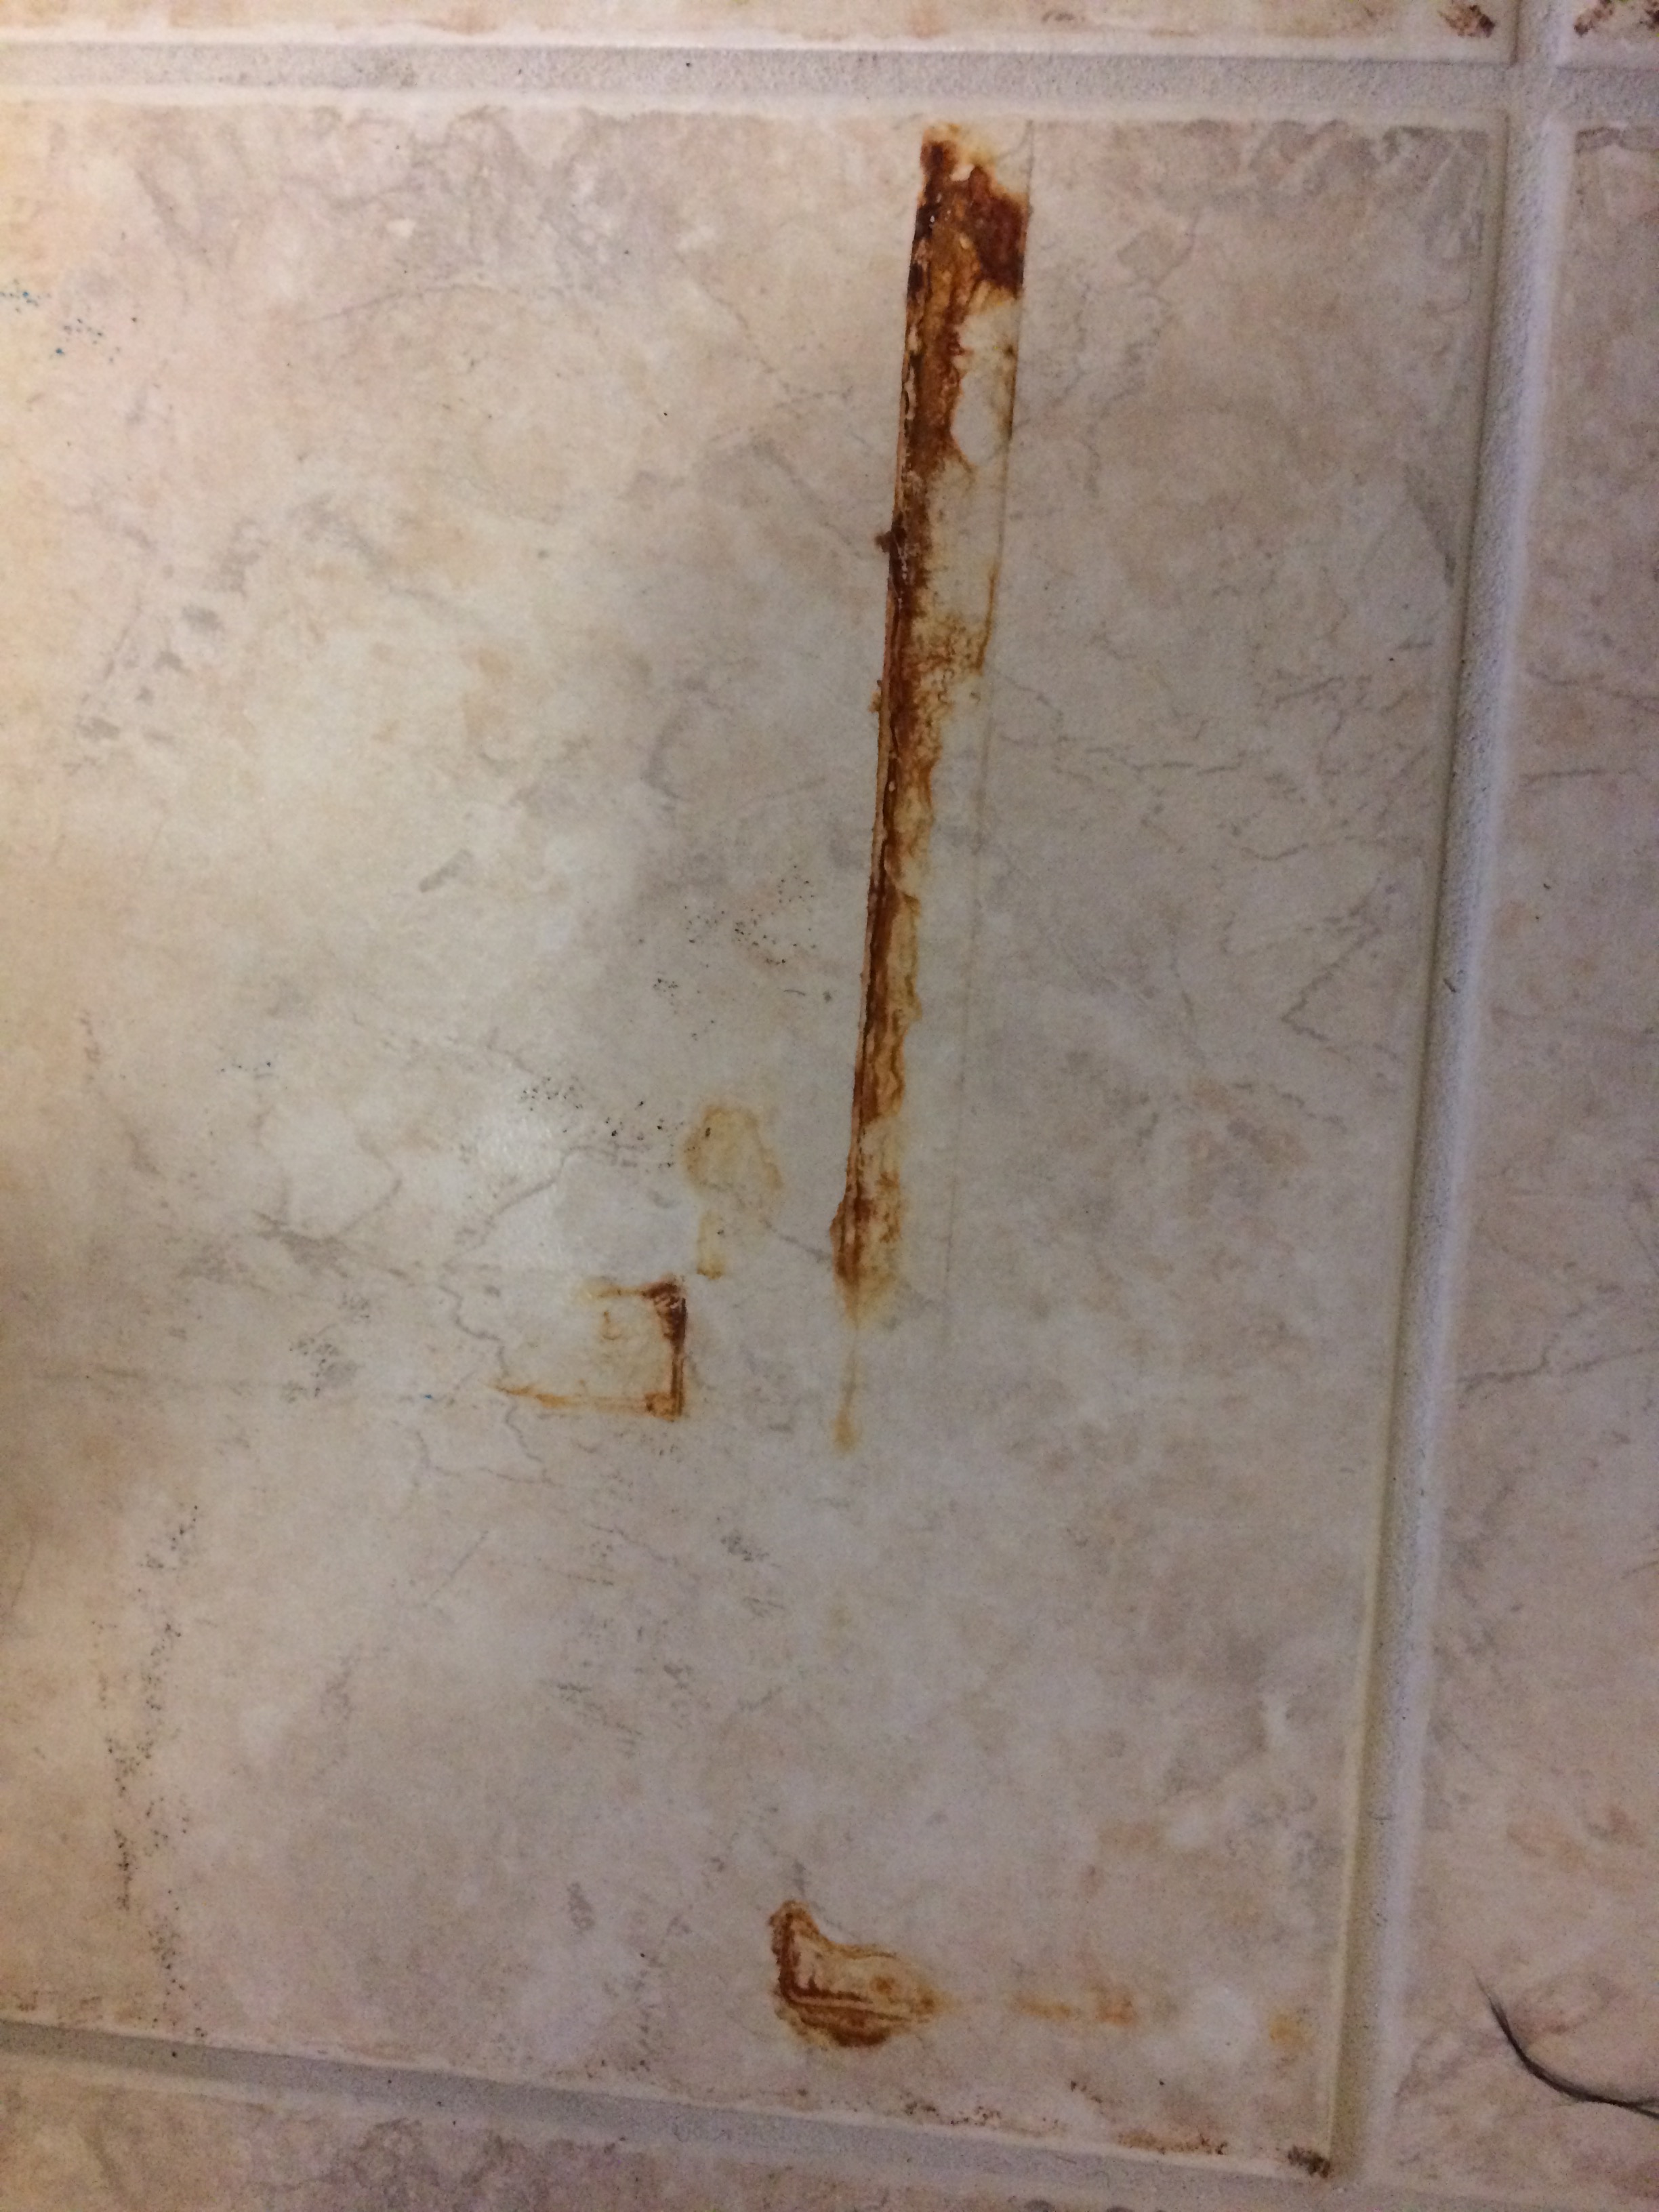 Rust stained tile floor